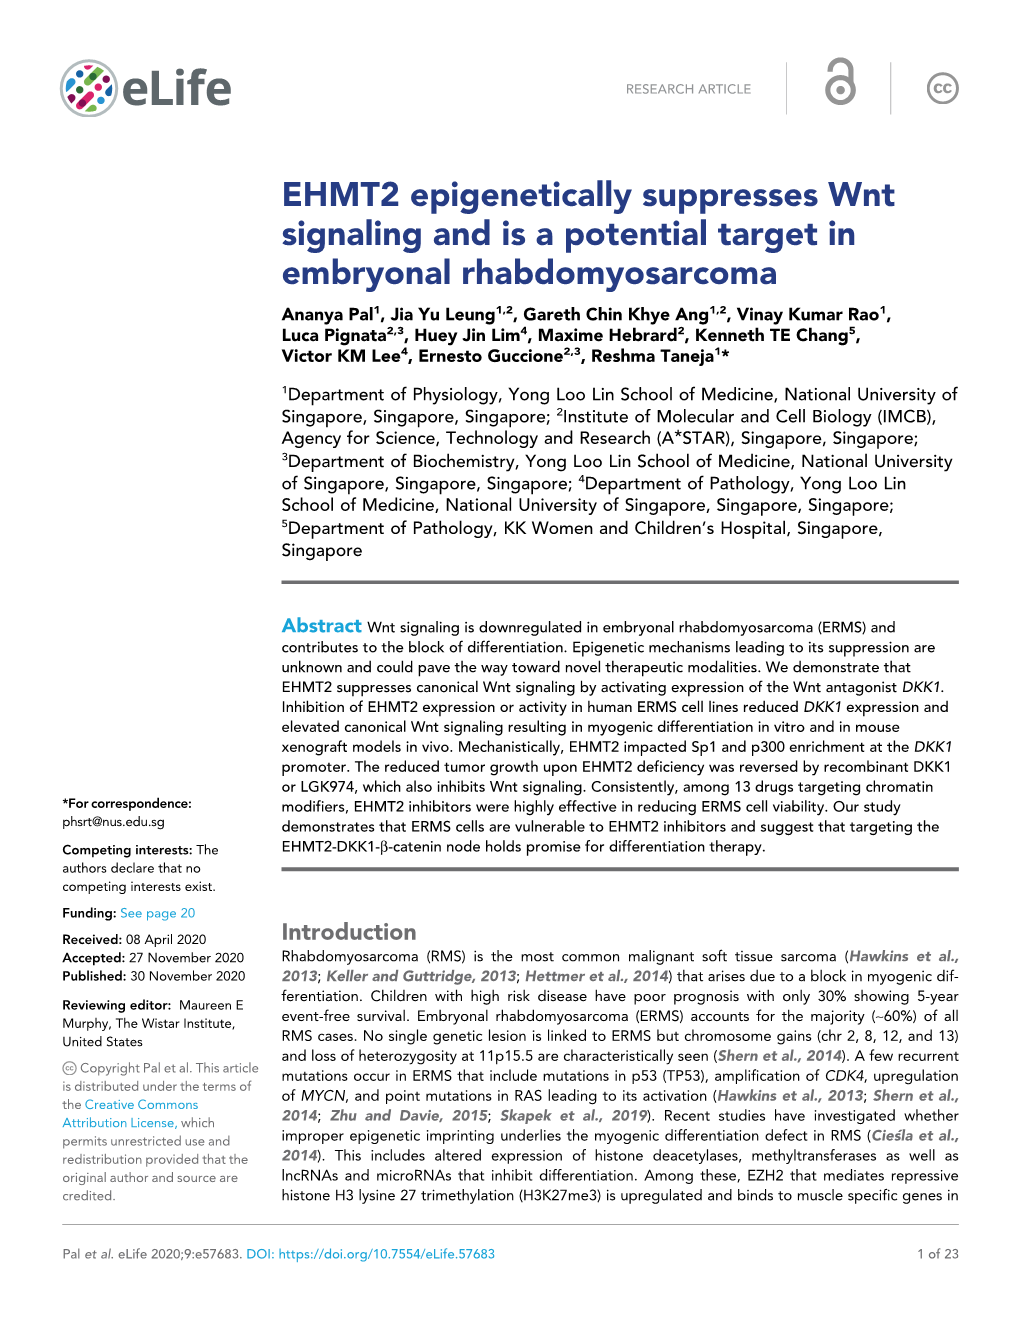 EHMT2 Epigenetically Suppresses Wnt Signaling and Is a Potential